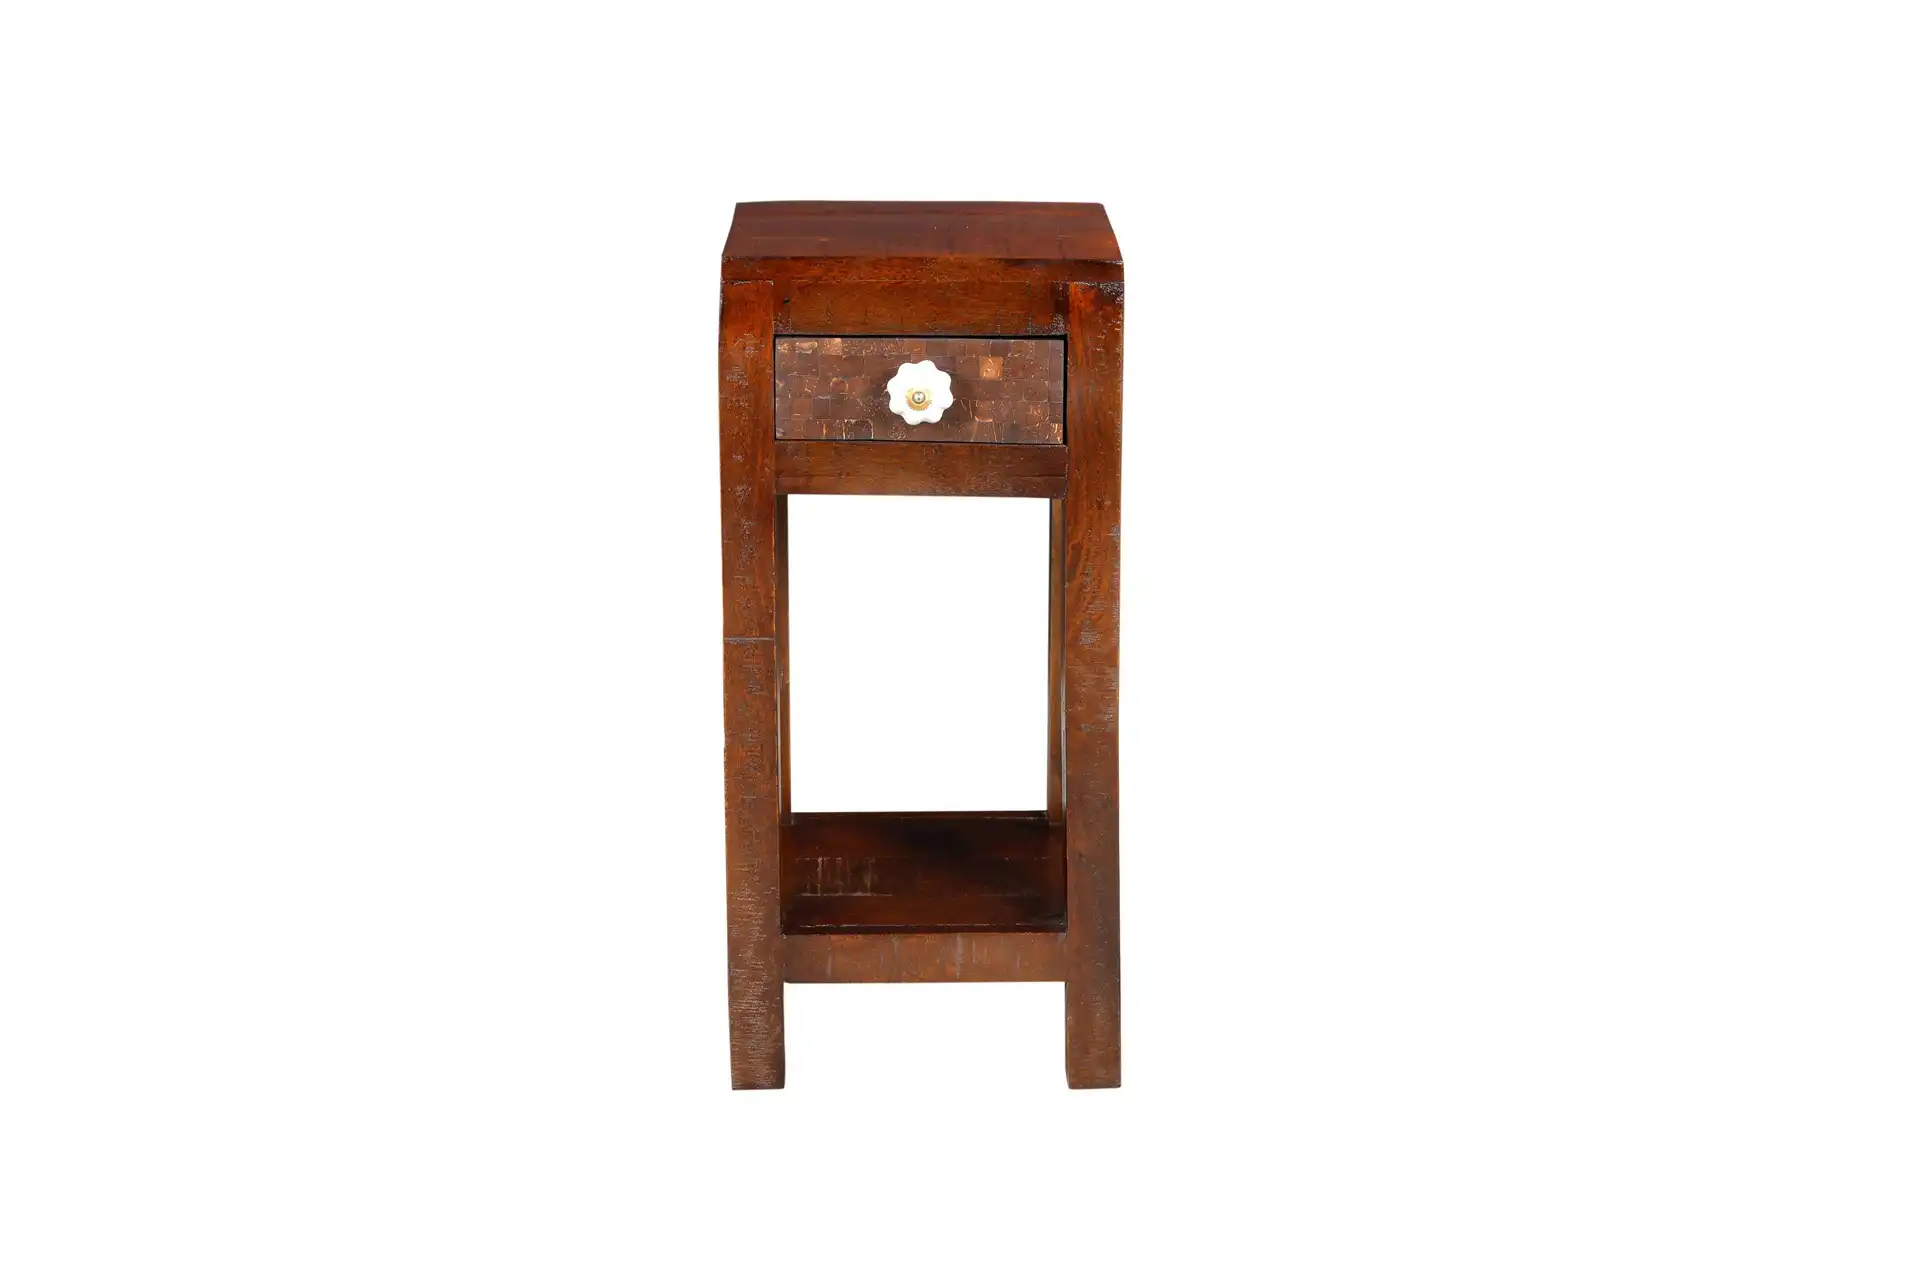 Wooden Side table with 1 Drawer - popular handicrafts